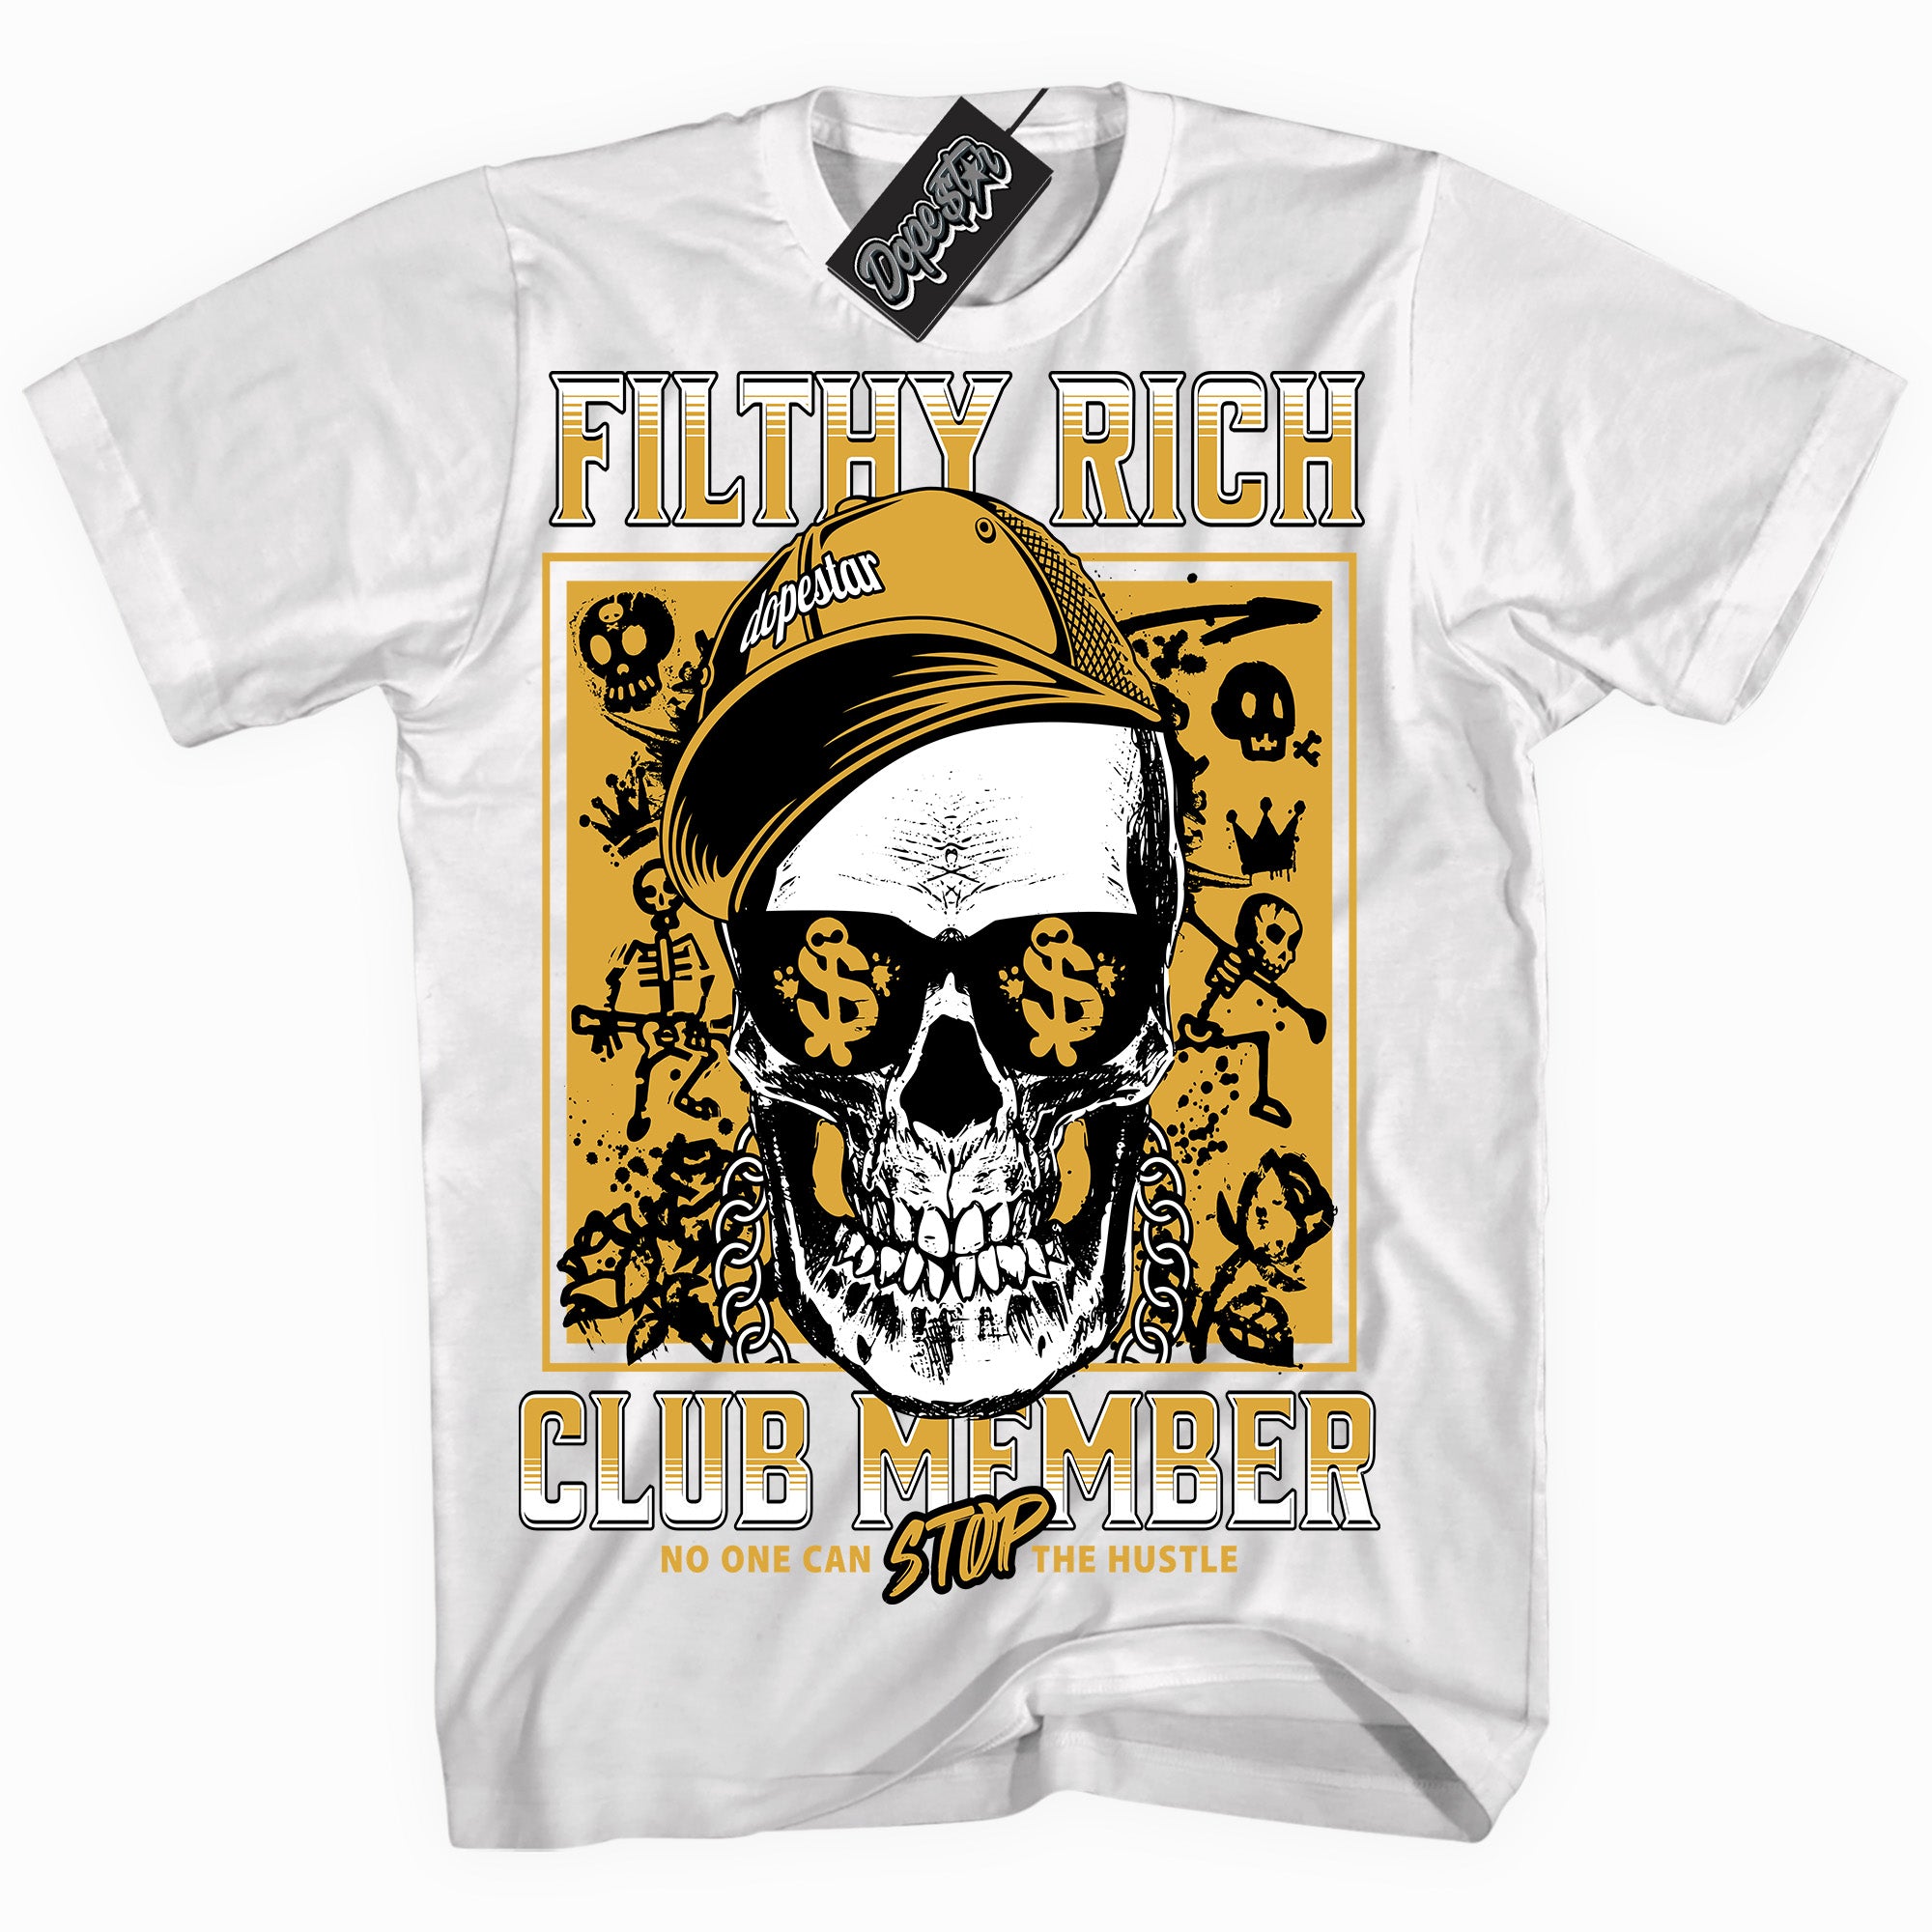 Cool White Shirt With Filthy Rich design That Perfectly Matches YELLOW OCHRE 6s Sneakers.